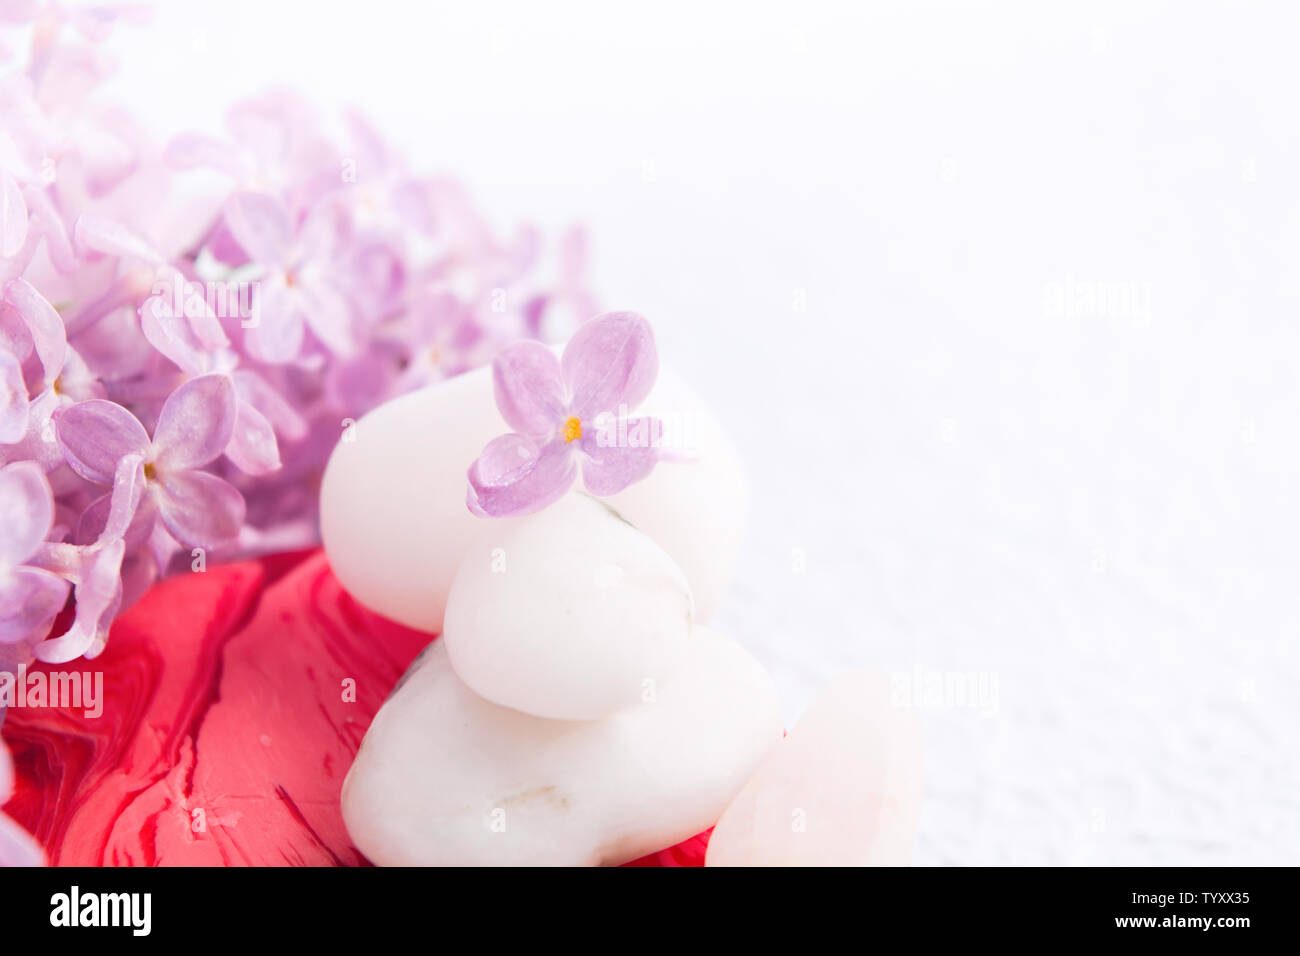 Spa and massage relaxation concept with white stones. red handmade soap and lilac flowers on white textured background with copy space. Selective focu Stock Photo